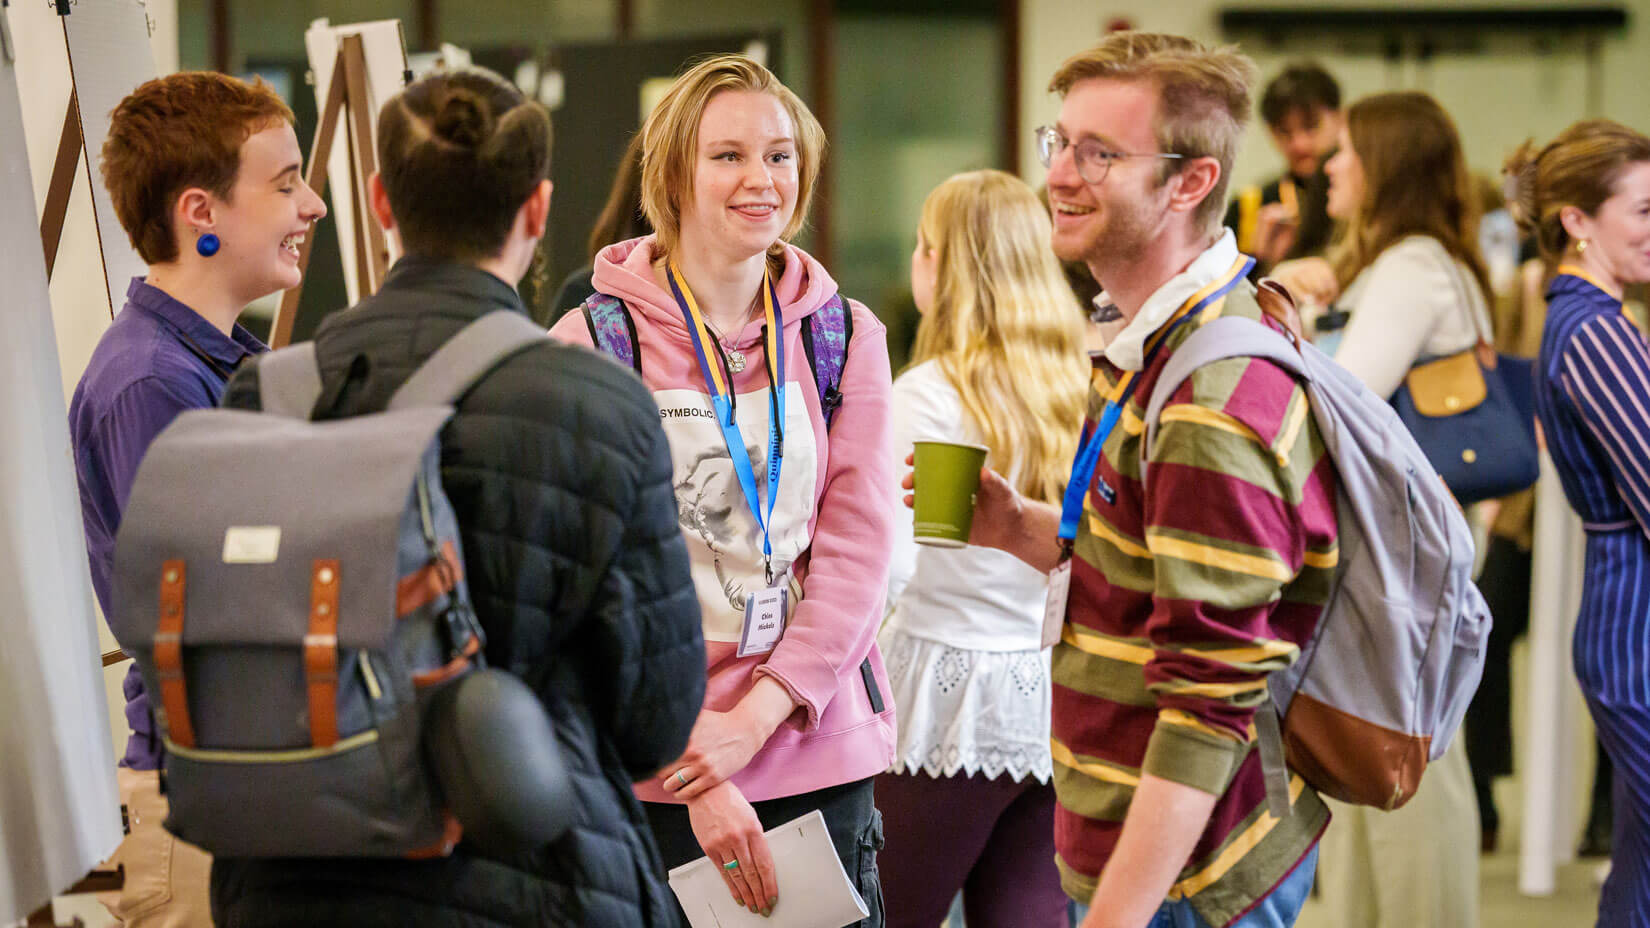 Students socialize at the annual NEURON Conference